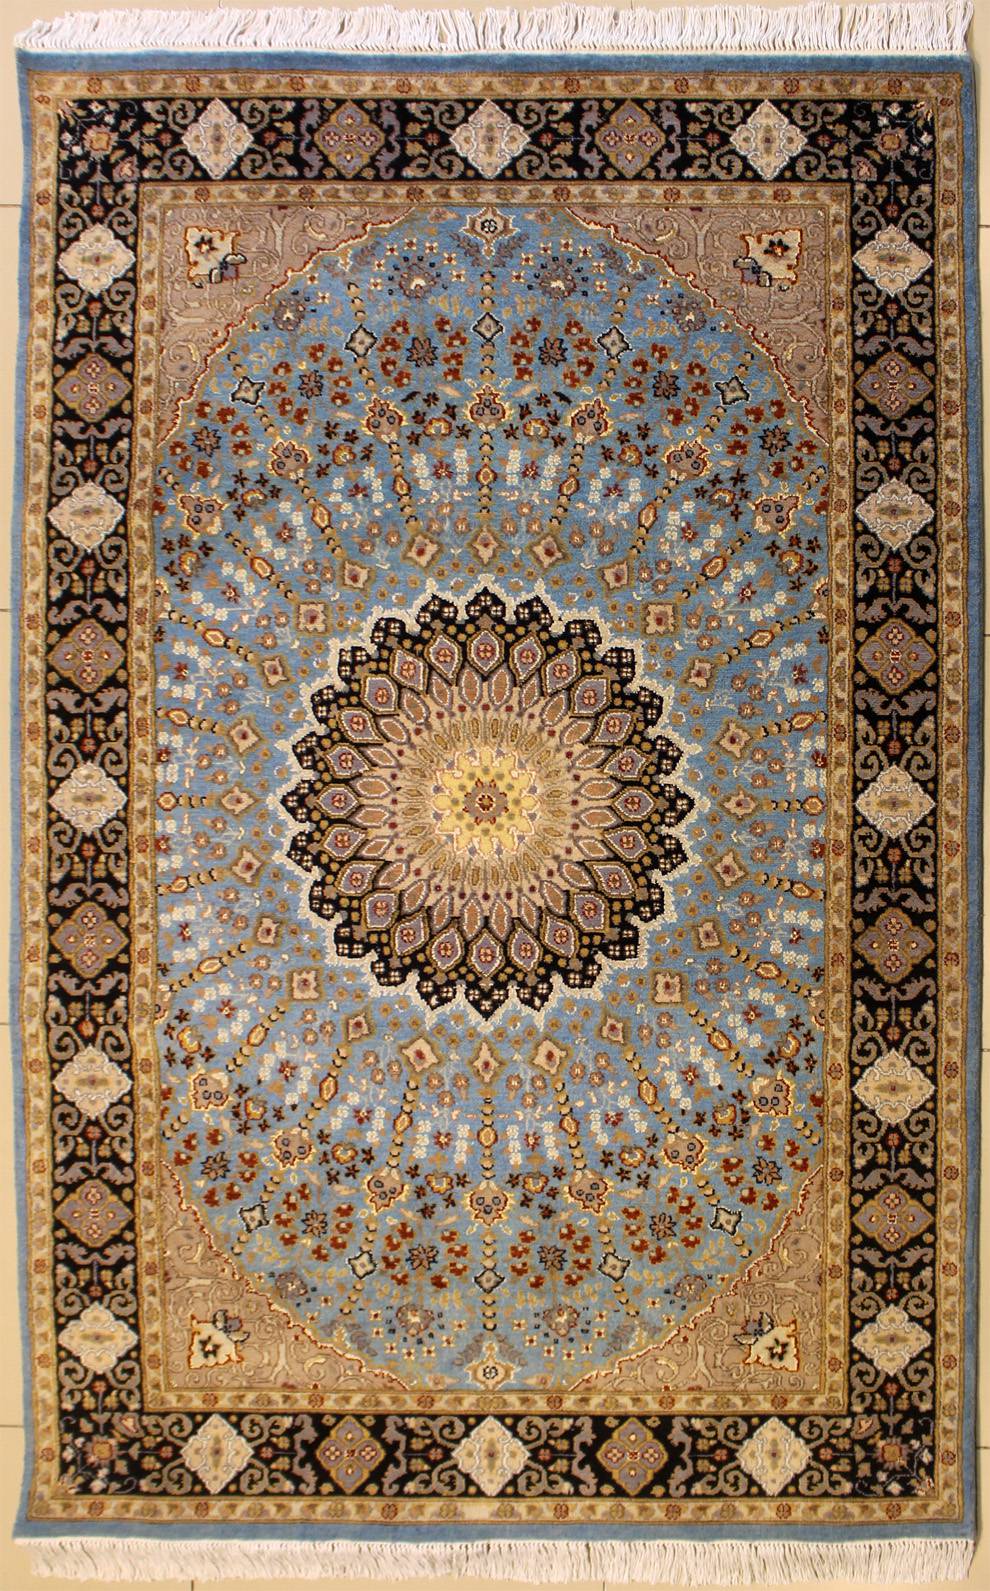 a 4x6 Rectangular Double Knot Rug RugsTC 4'1 x 6'2 Pak Persian Area Rug with Wool Pile Floral Design 100% Original Hand-Knotted in Blue,Reddish Brown,Beige Colors